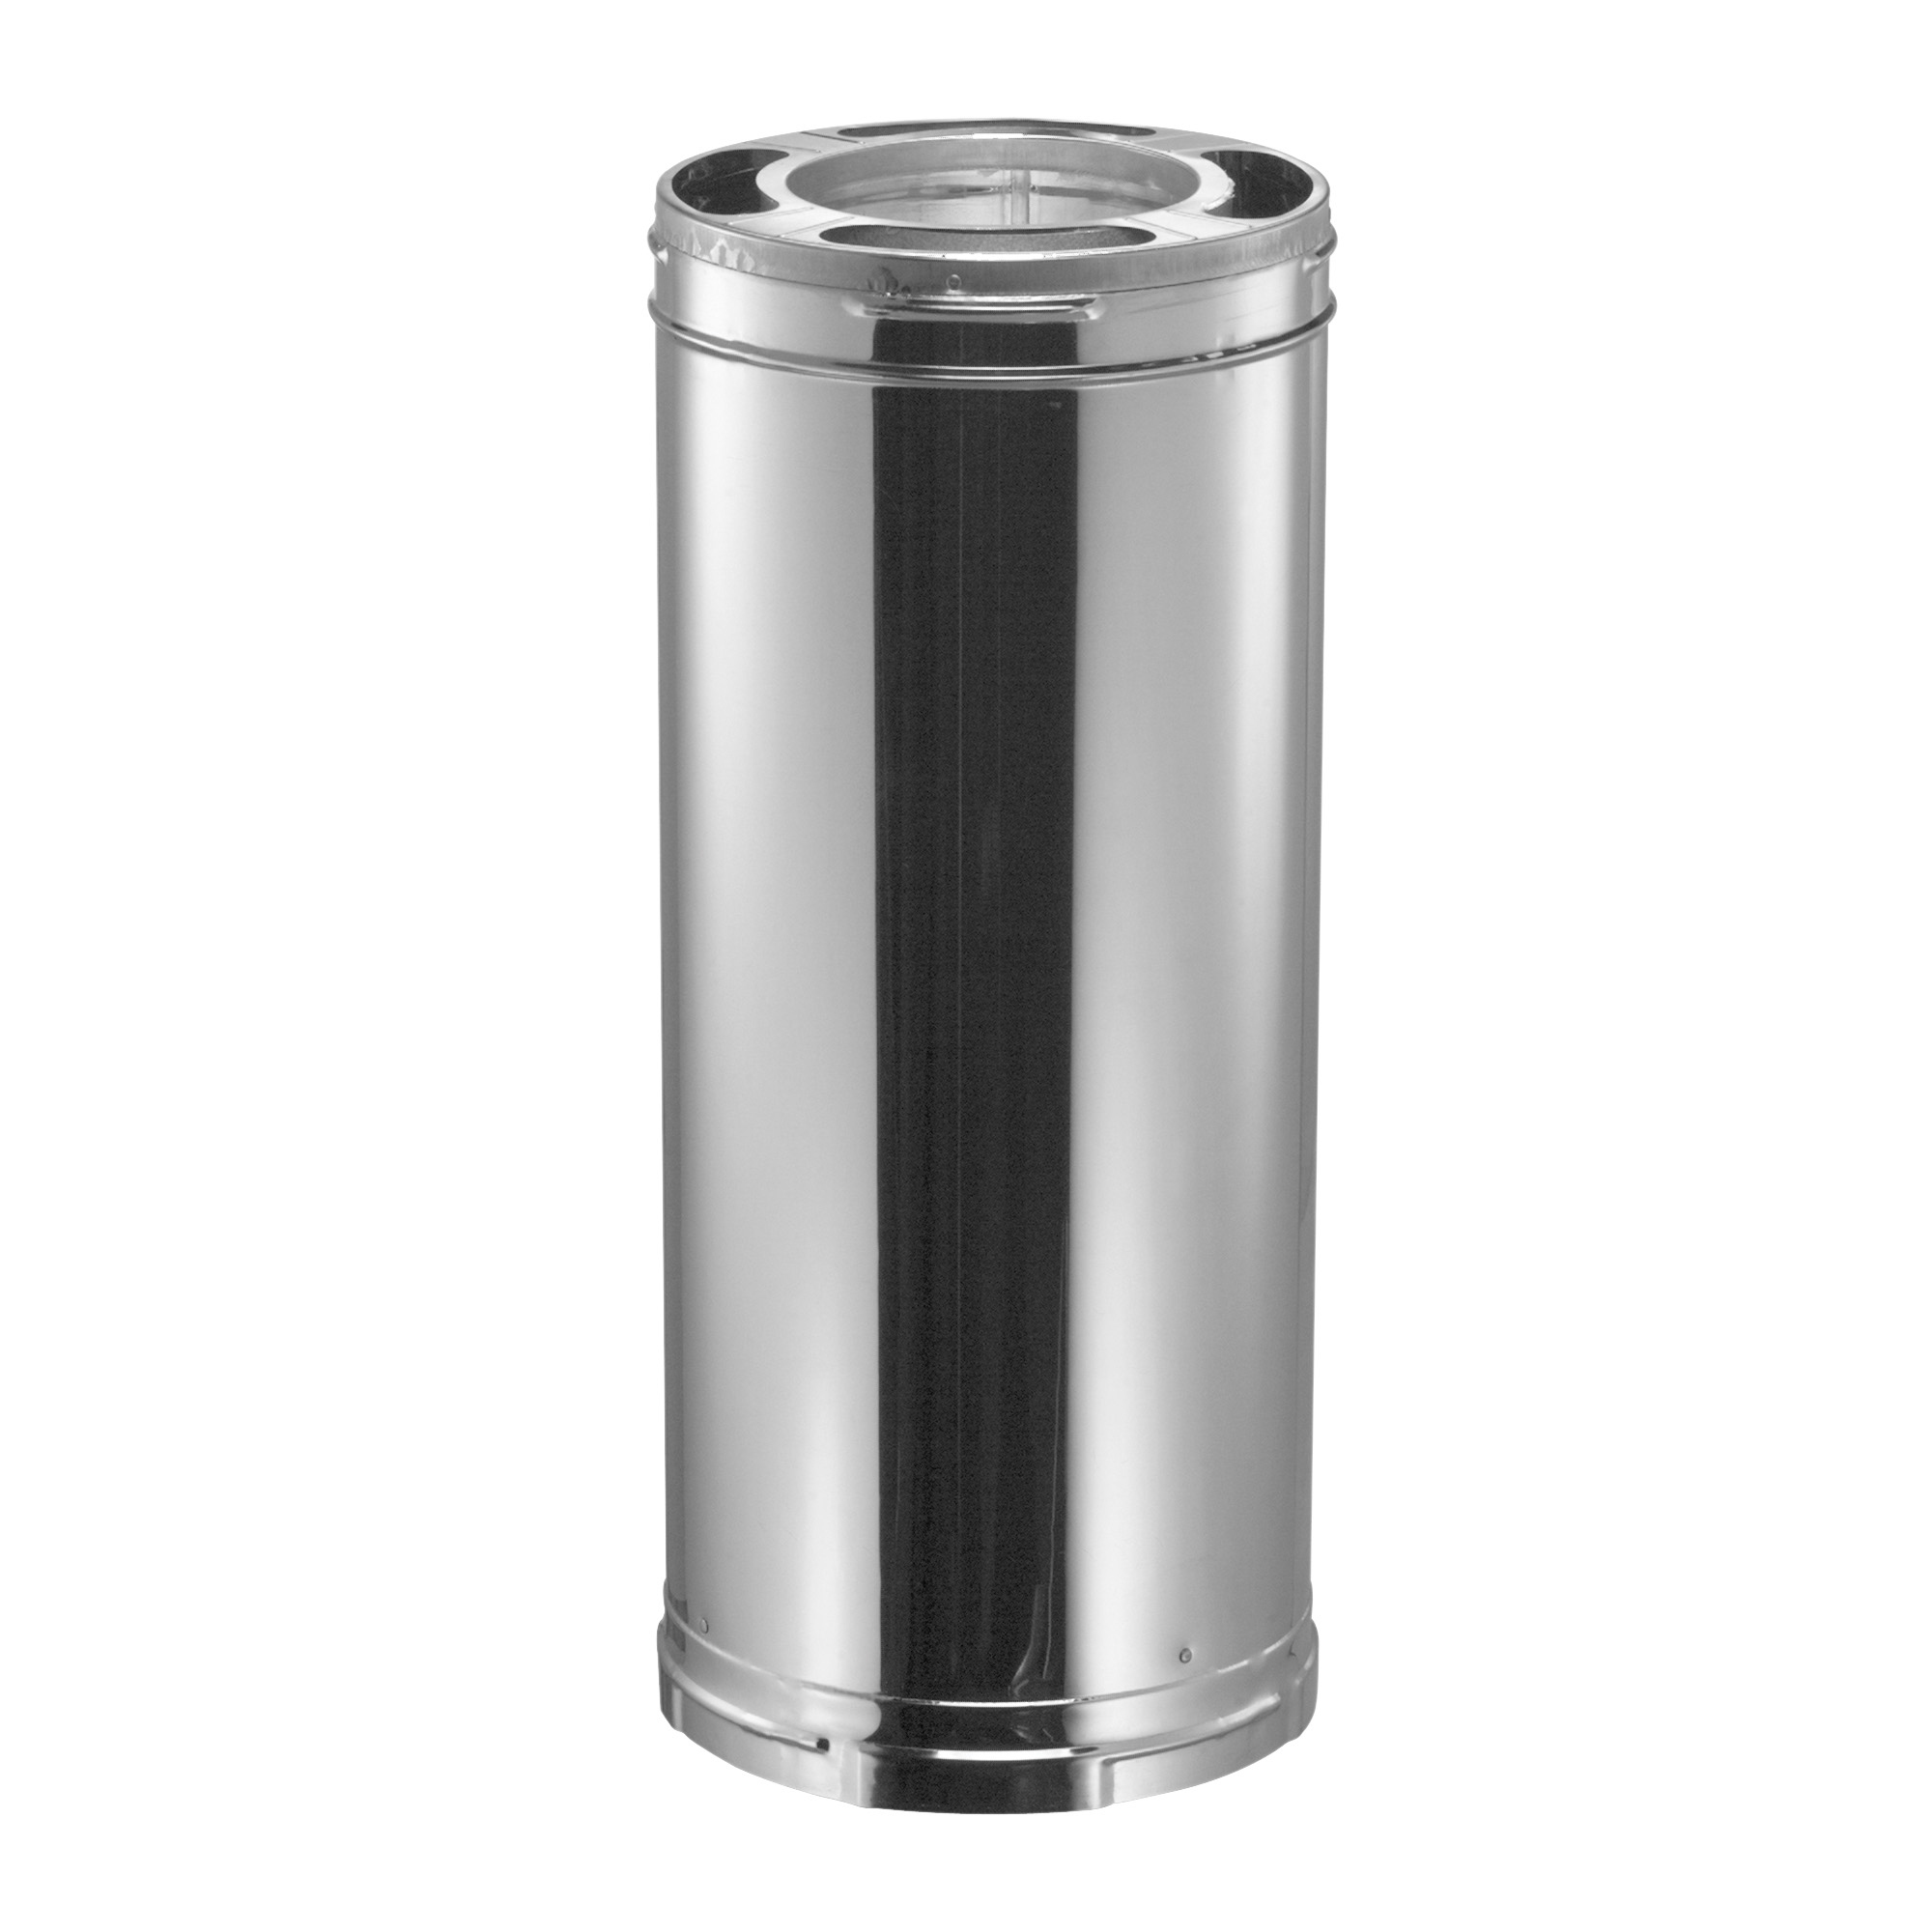 6Inch Diameter 12Inch Length SS Chimney Pipe, Included (qty.) 1 Material Stainless Steel, Model - DuraVent 6DP-12SS